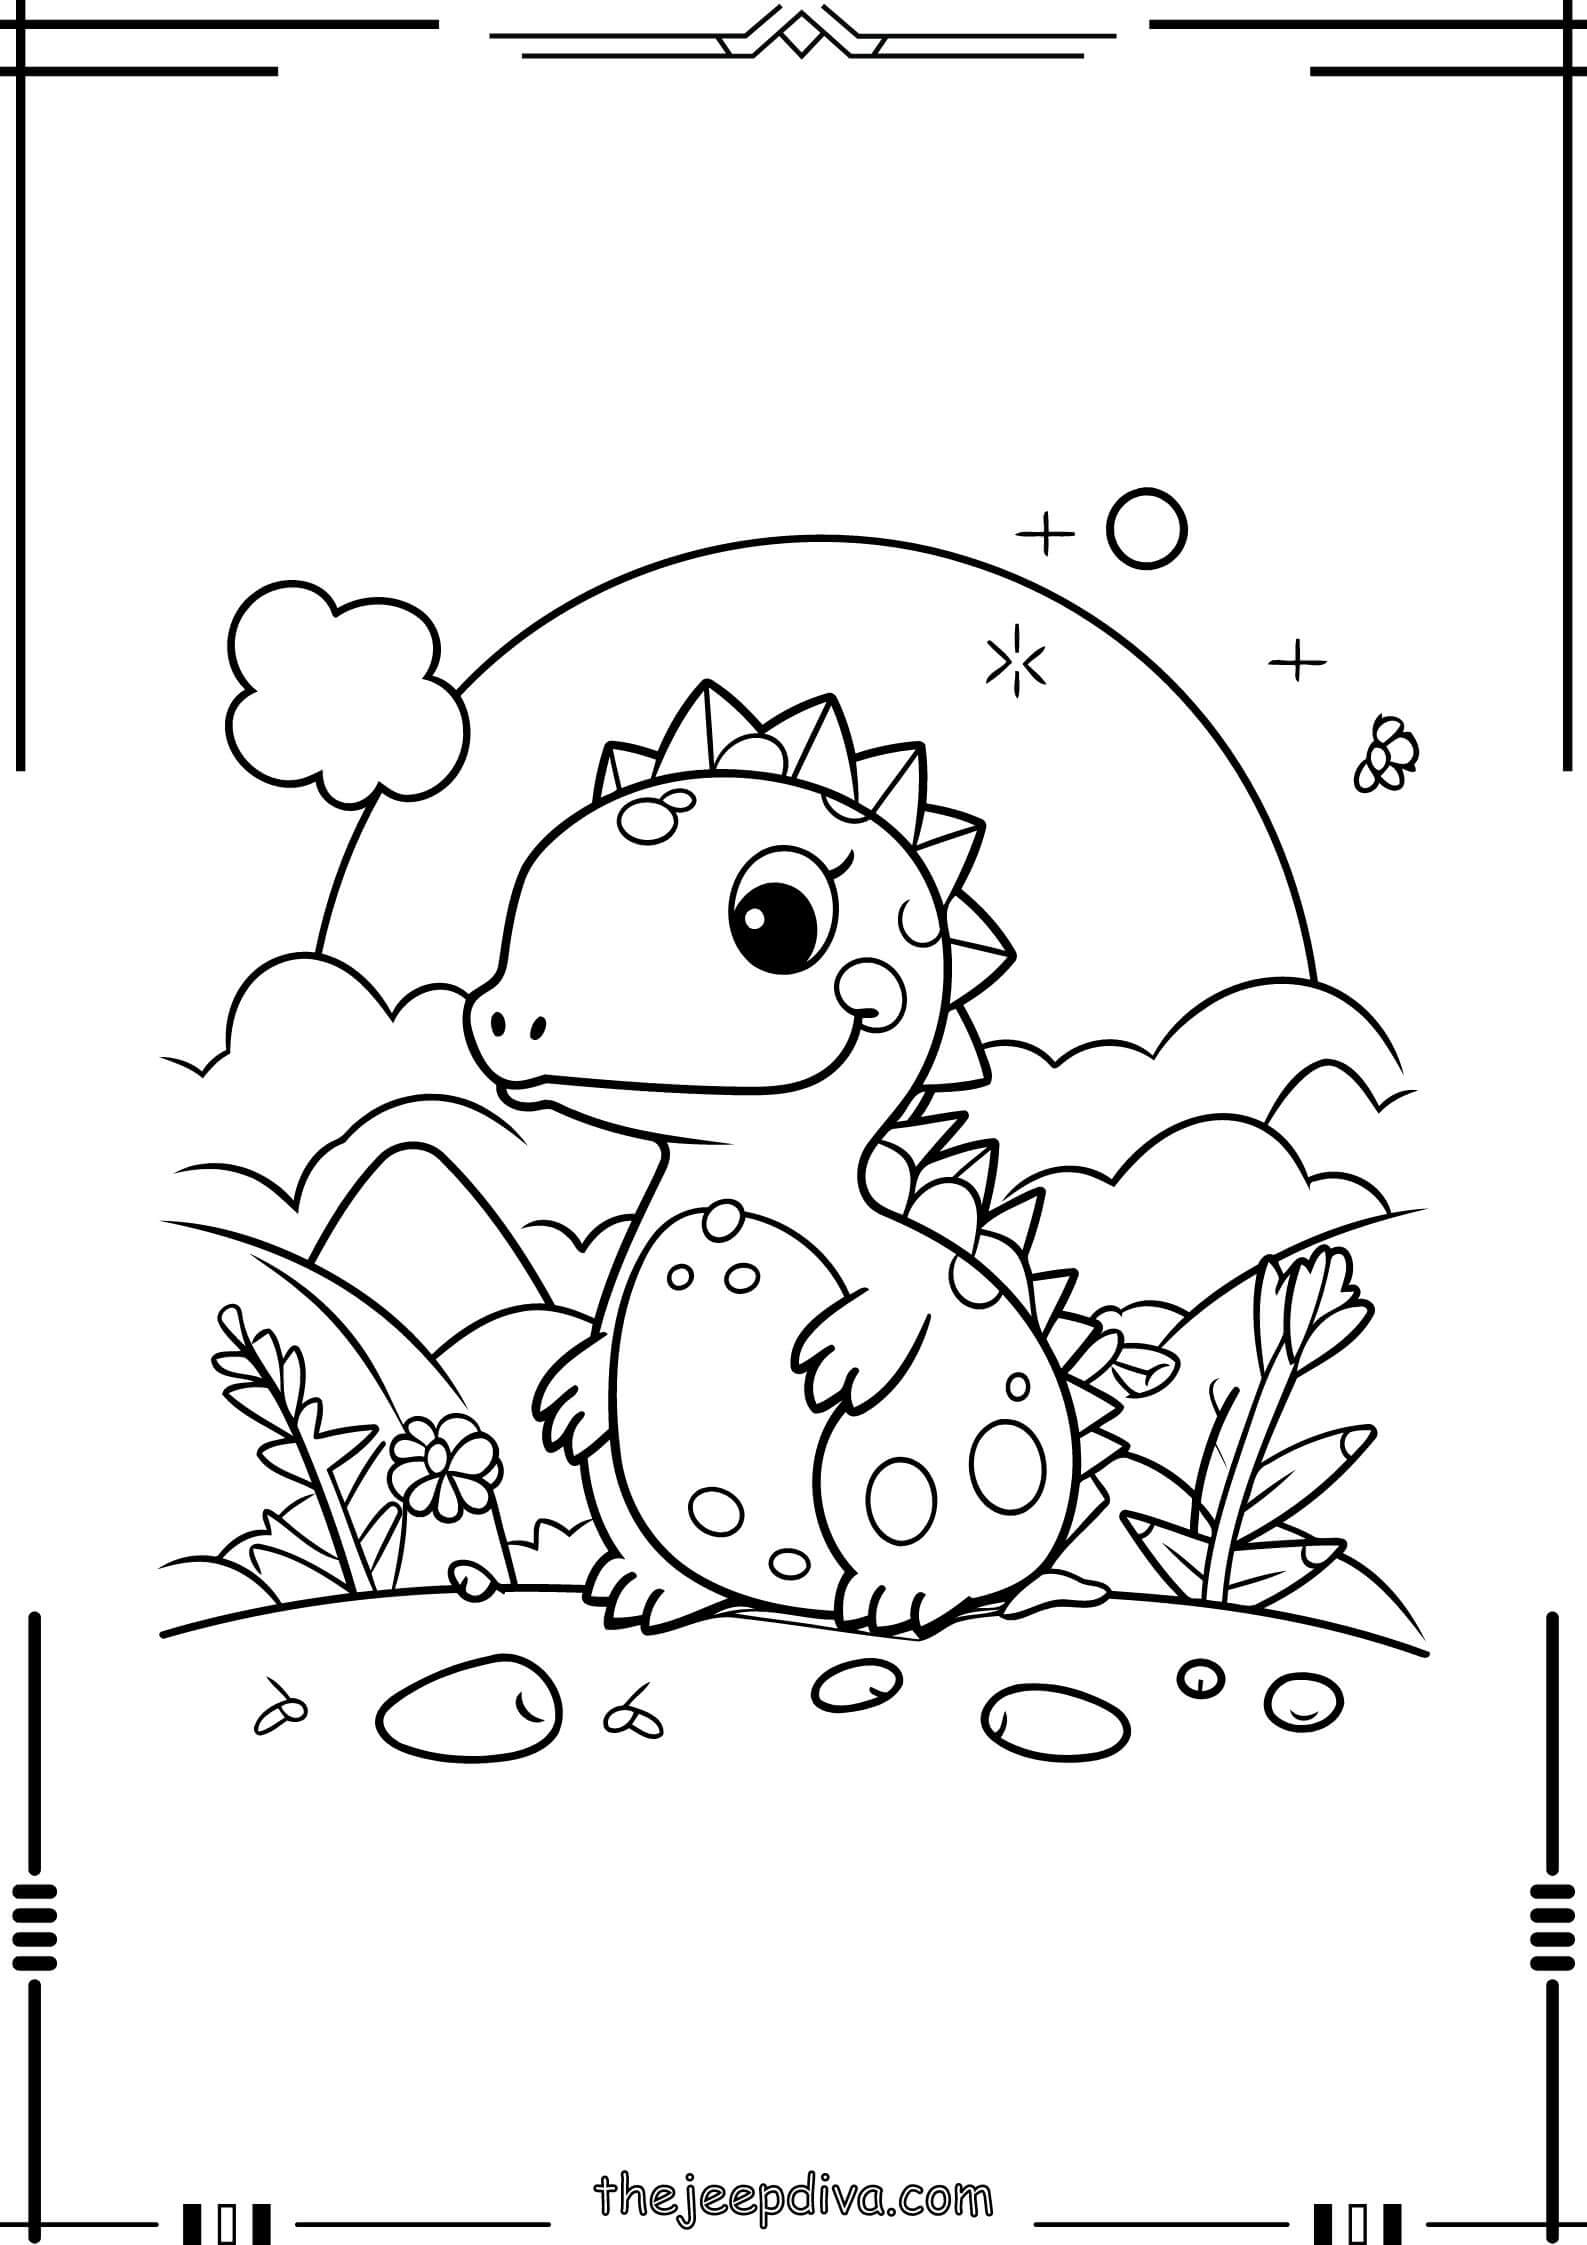 Dinosaur-Colouring-Pages-Easy-20